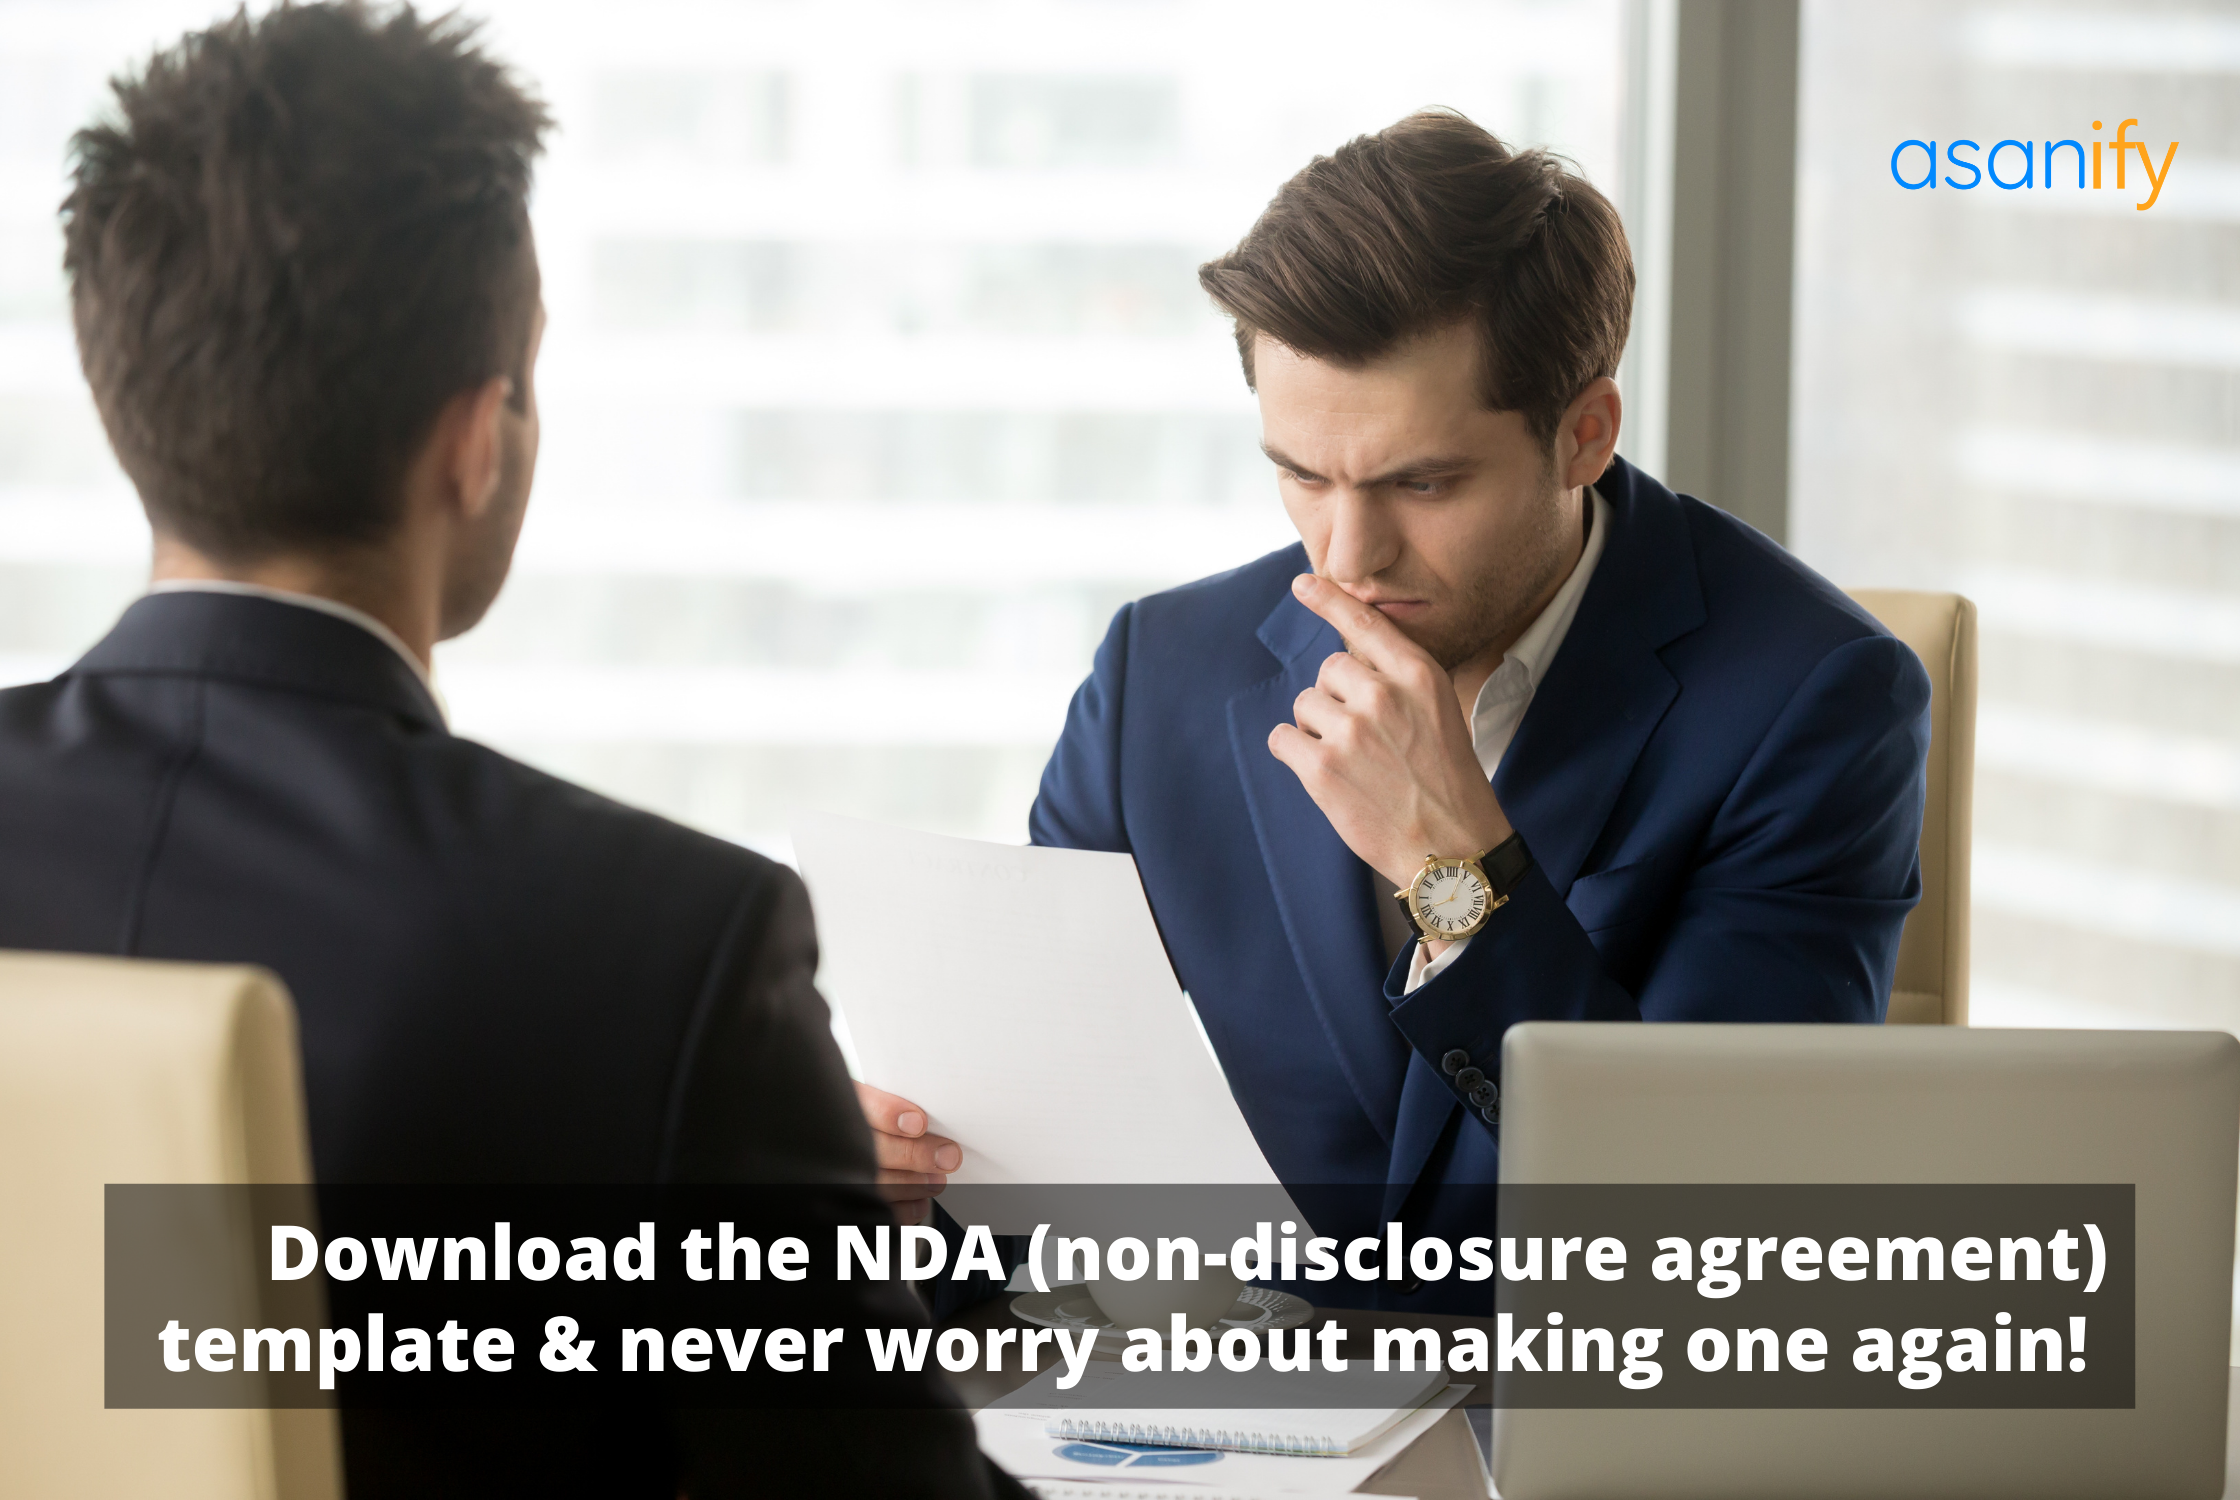 You are currently viewing Non Disclosure Agreement [+ template] 9 points you absolutely cannot skip